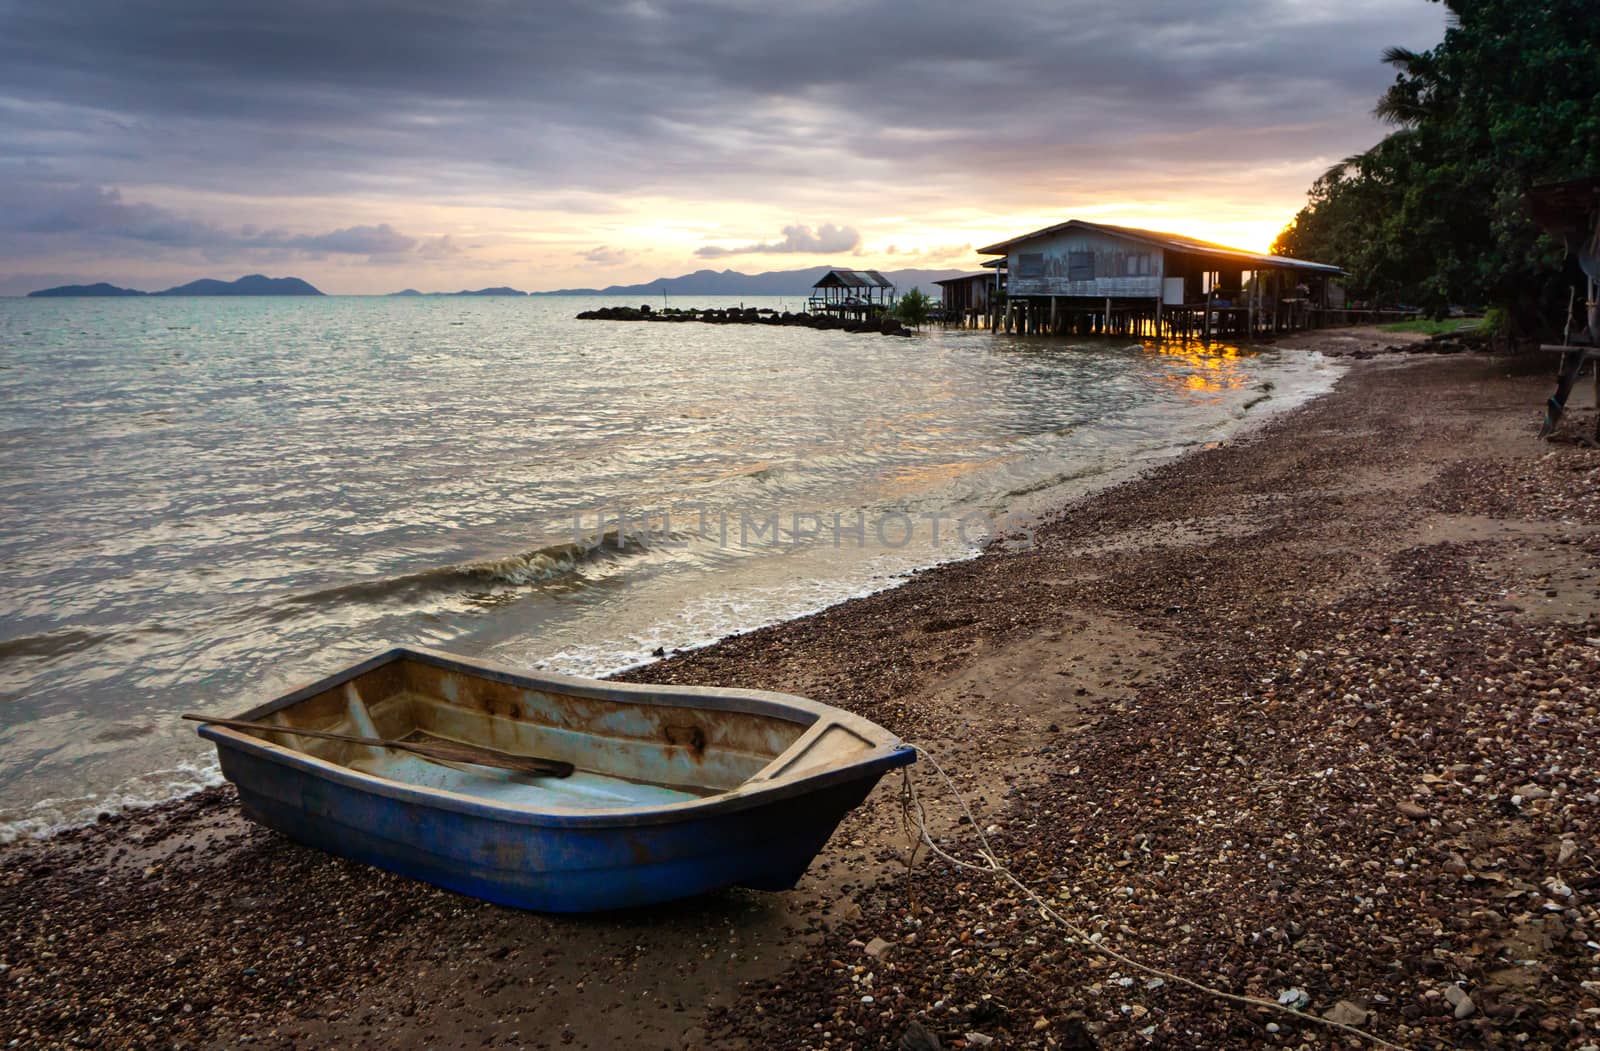 Fishing boat parked in the beach at sunset time in Thailand by pkproject